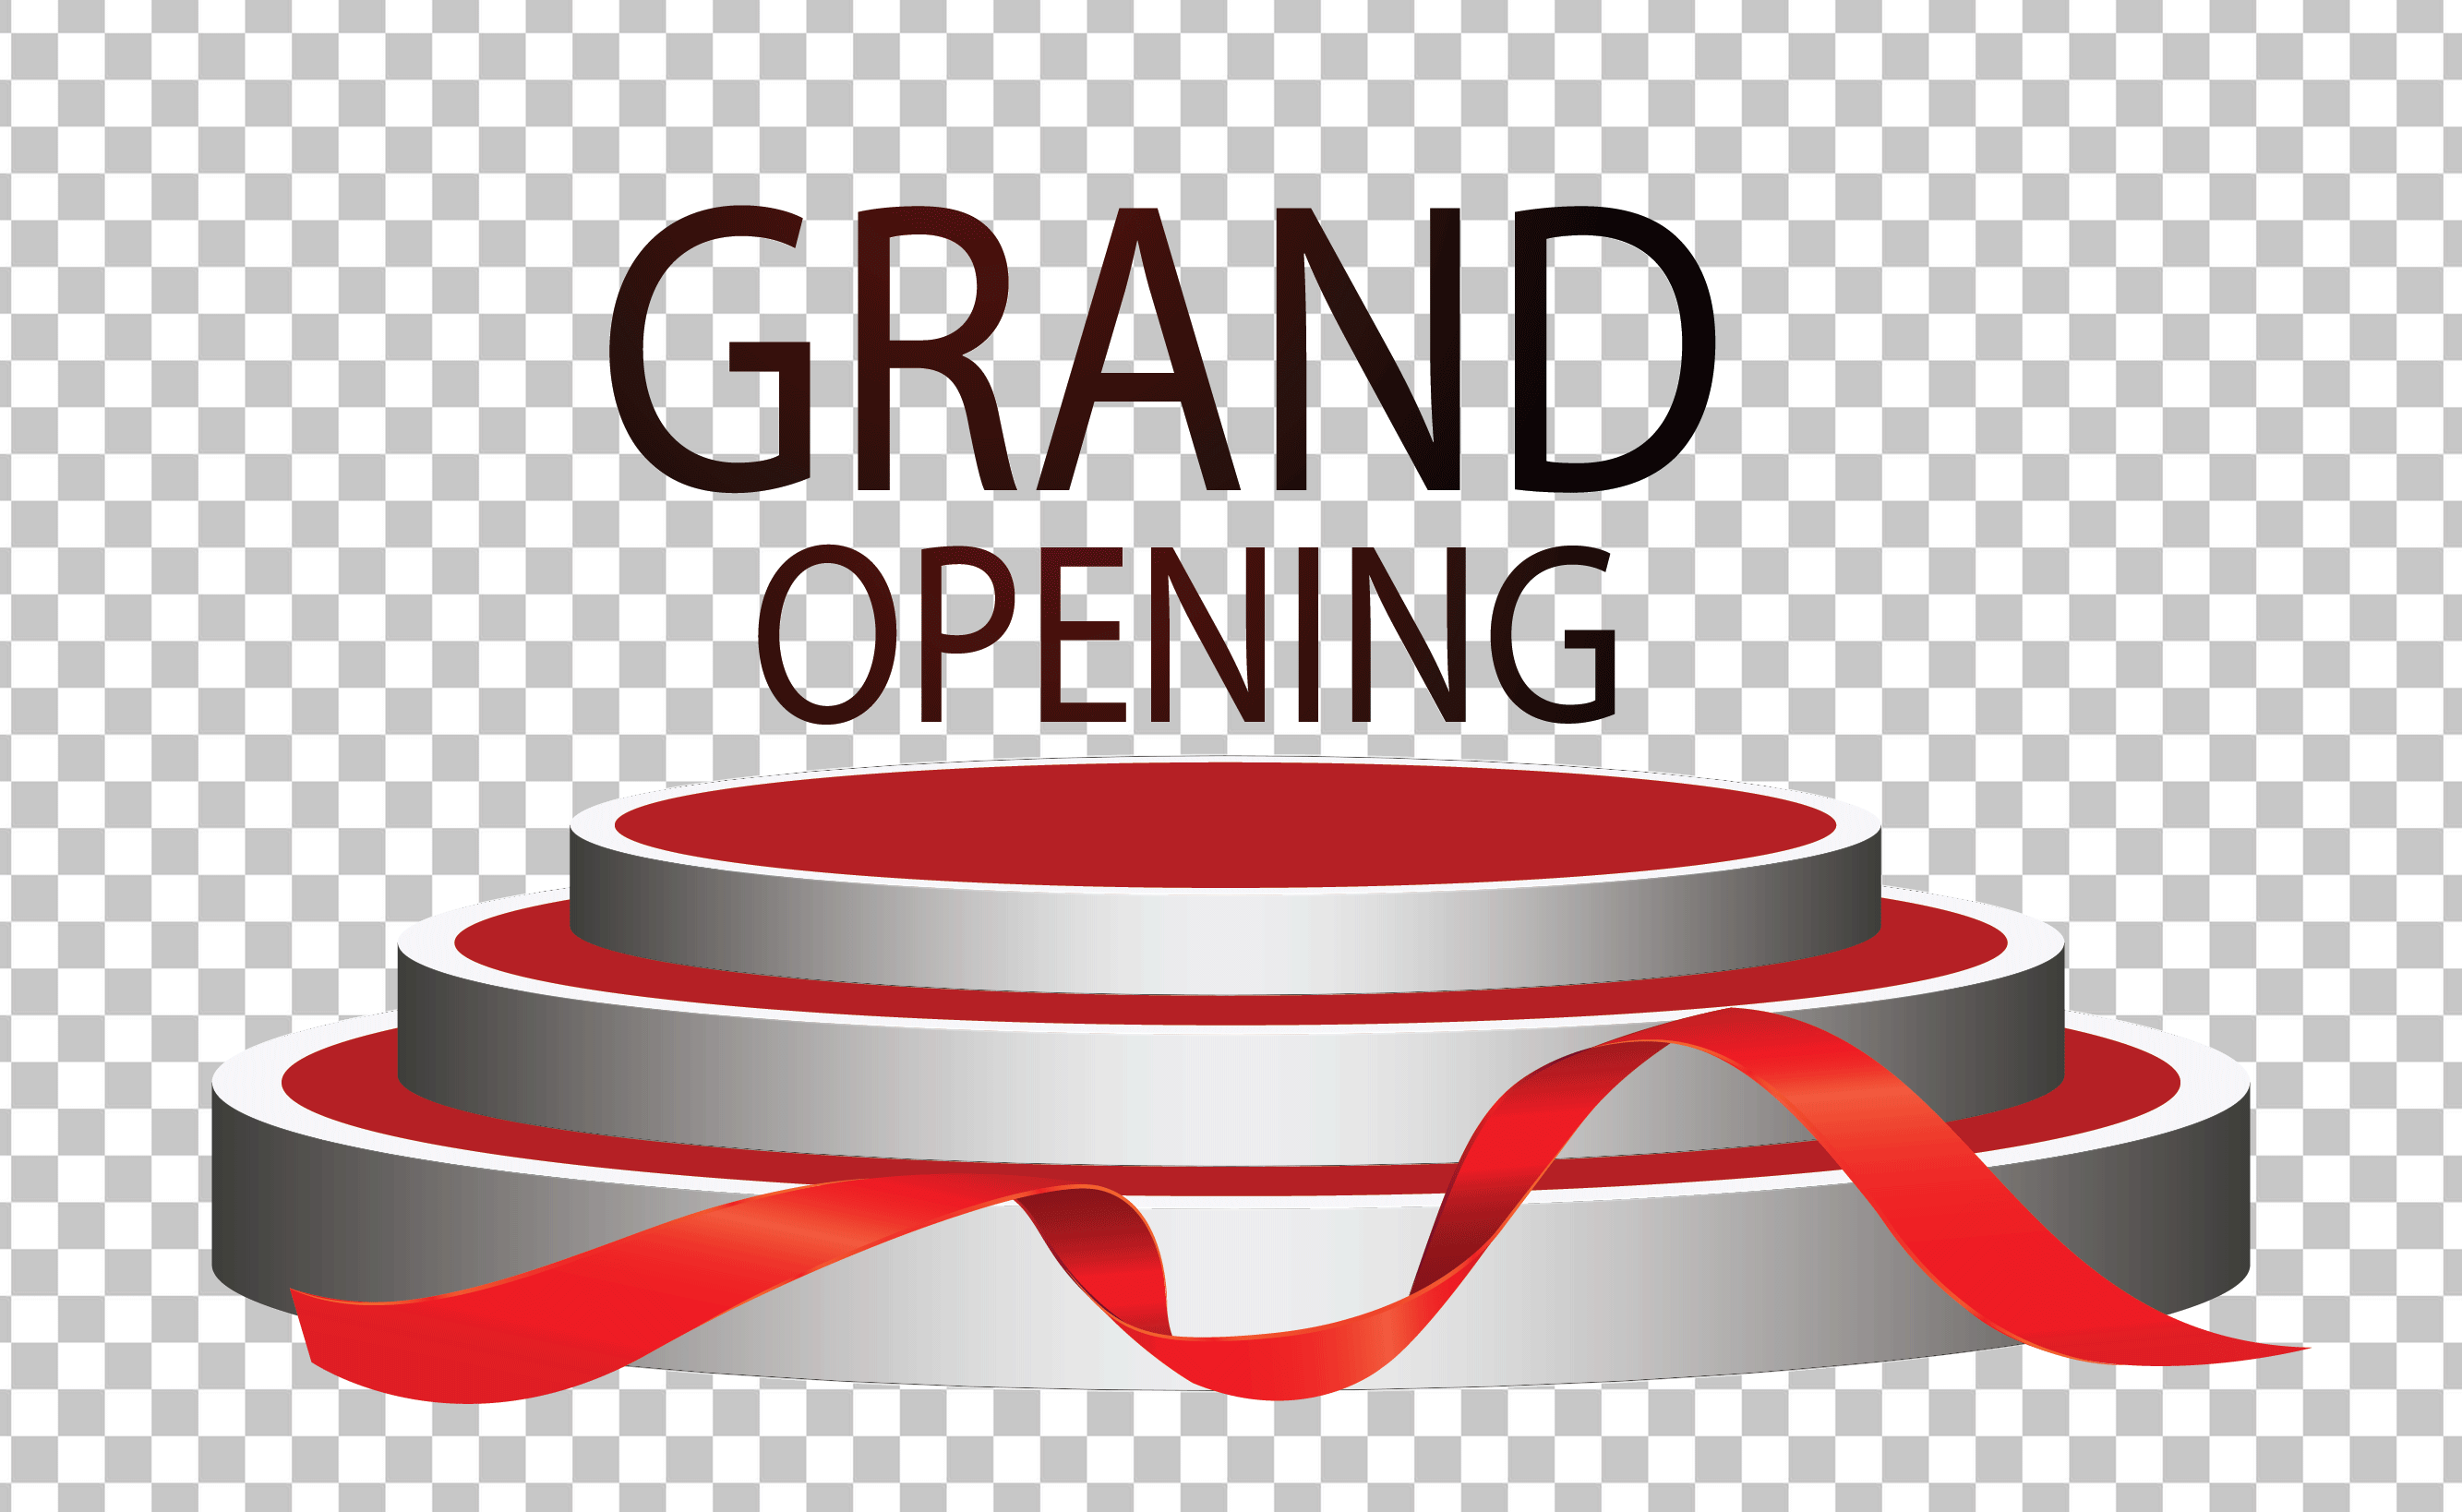 Grand Opening Illustrations ~ Grand Opening Vectors | Pond5